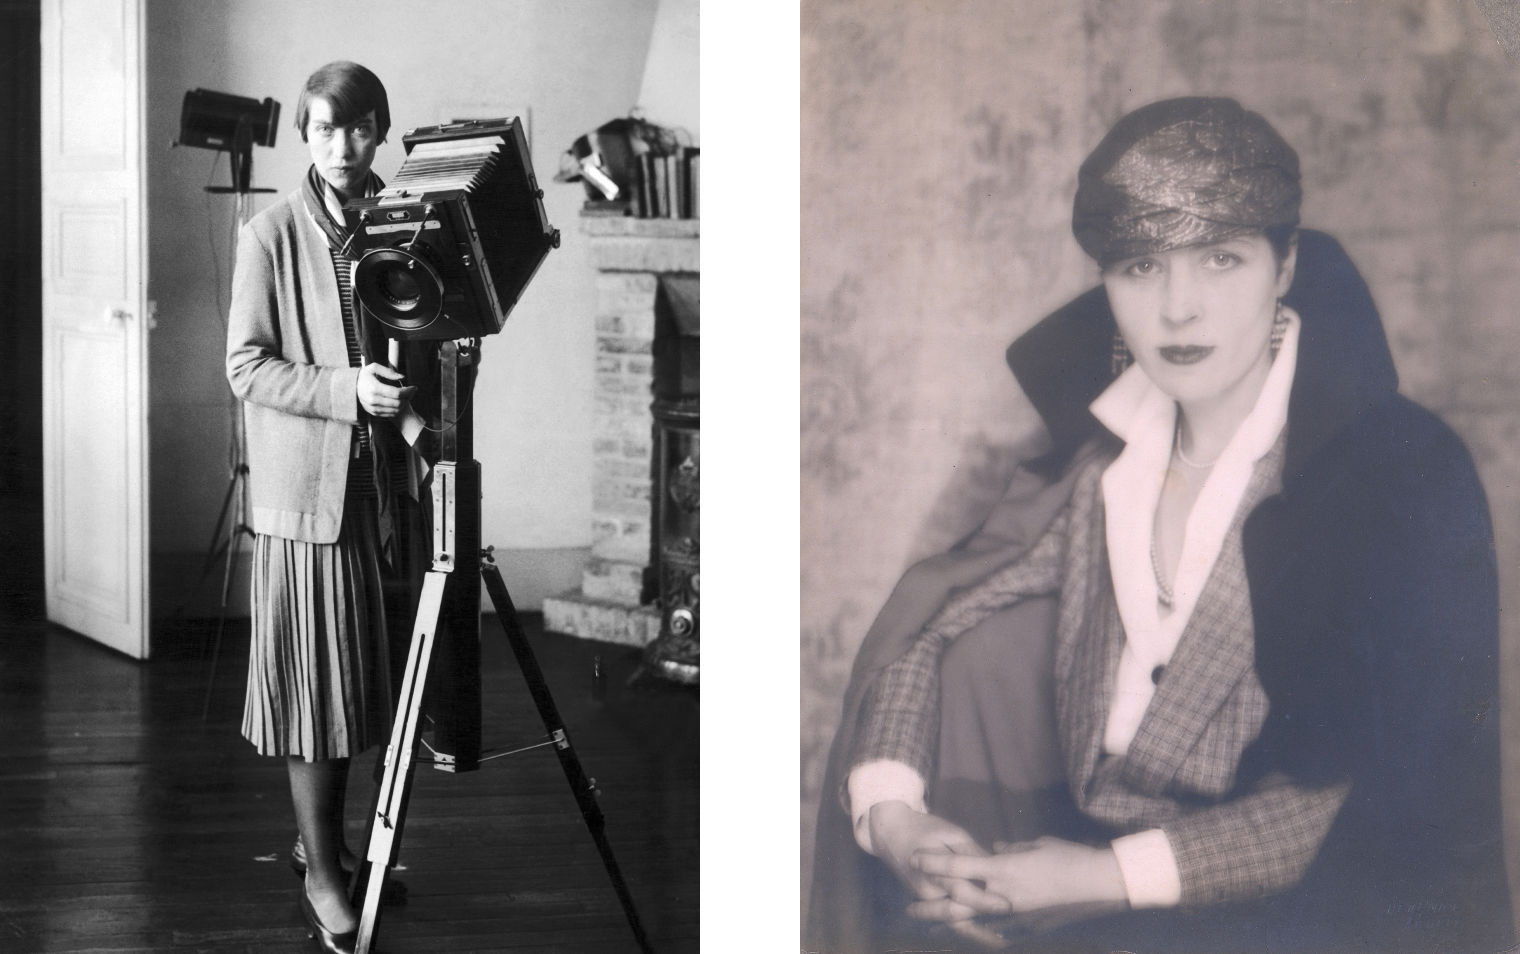 On the left, the artist Berenice Abbot poses standing next to a large format camera perched on a tripod; on the right Djuna Barnes poses seated for a portrait photograph dressed in a tailored shirt and jacket.